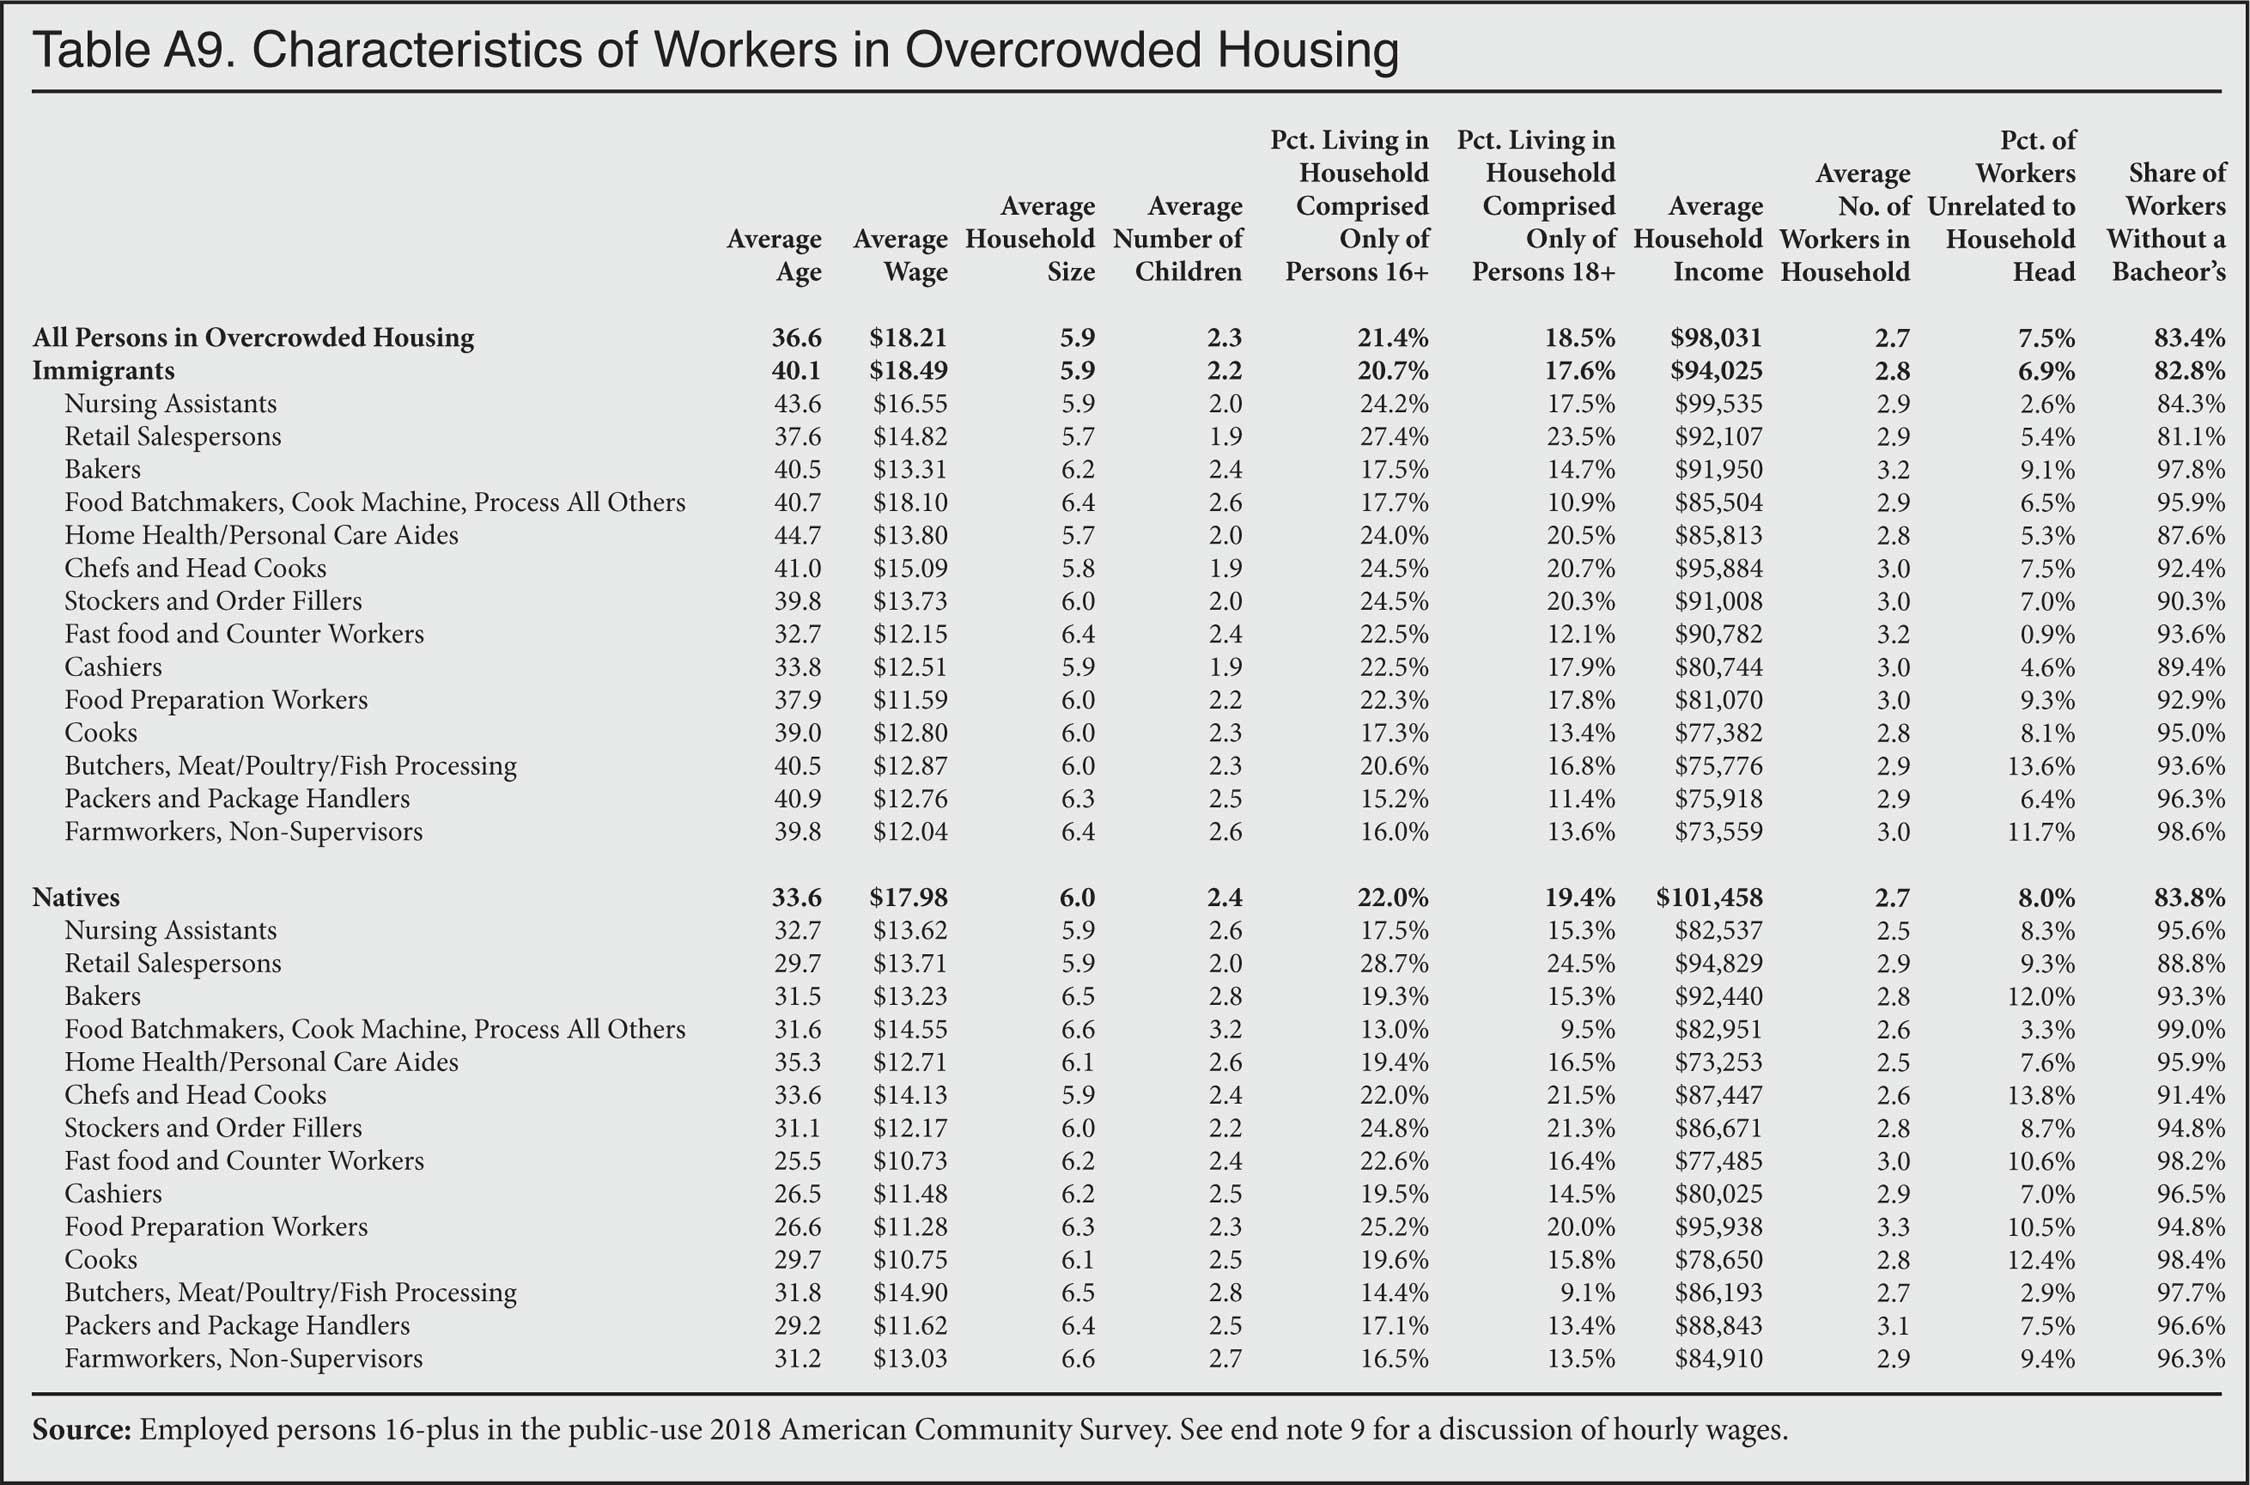 Table: Characteristics of workers in overcrowded housing